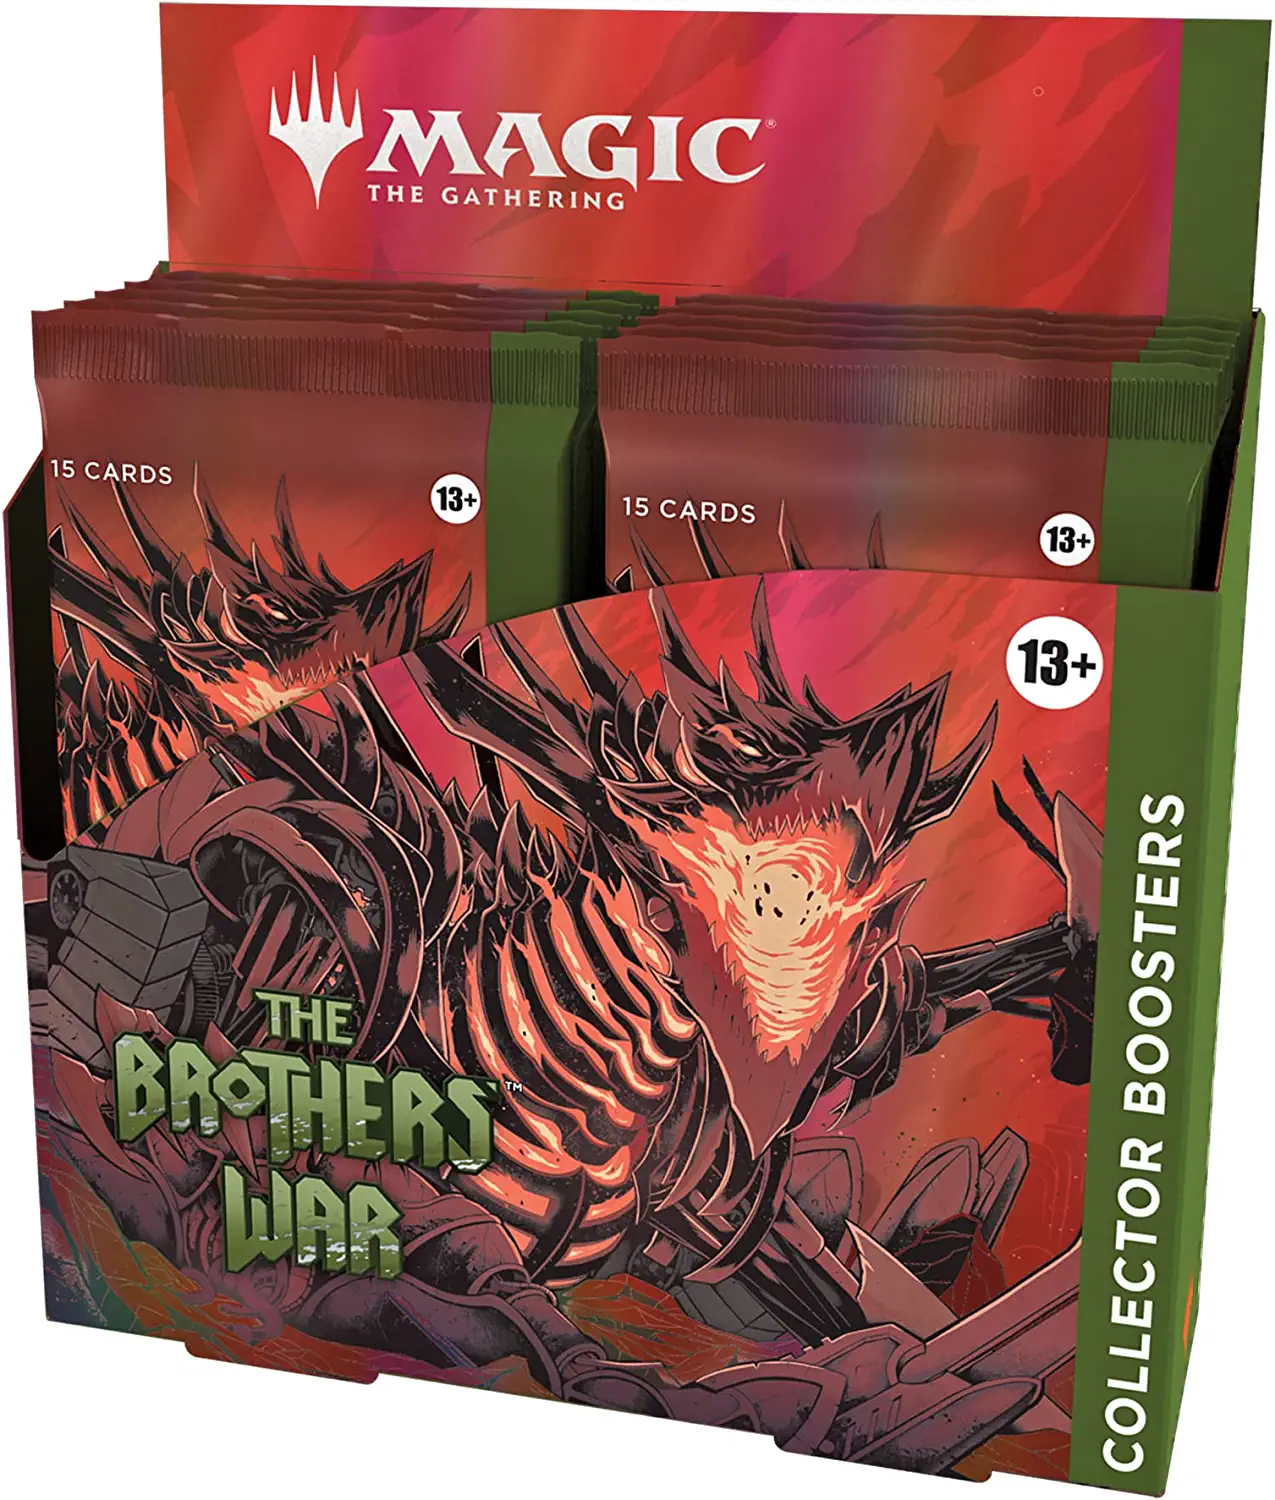 Magic: The Brothers War - Collector Boosterbox